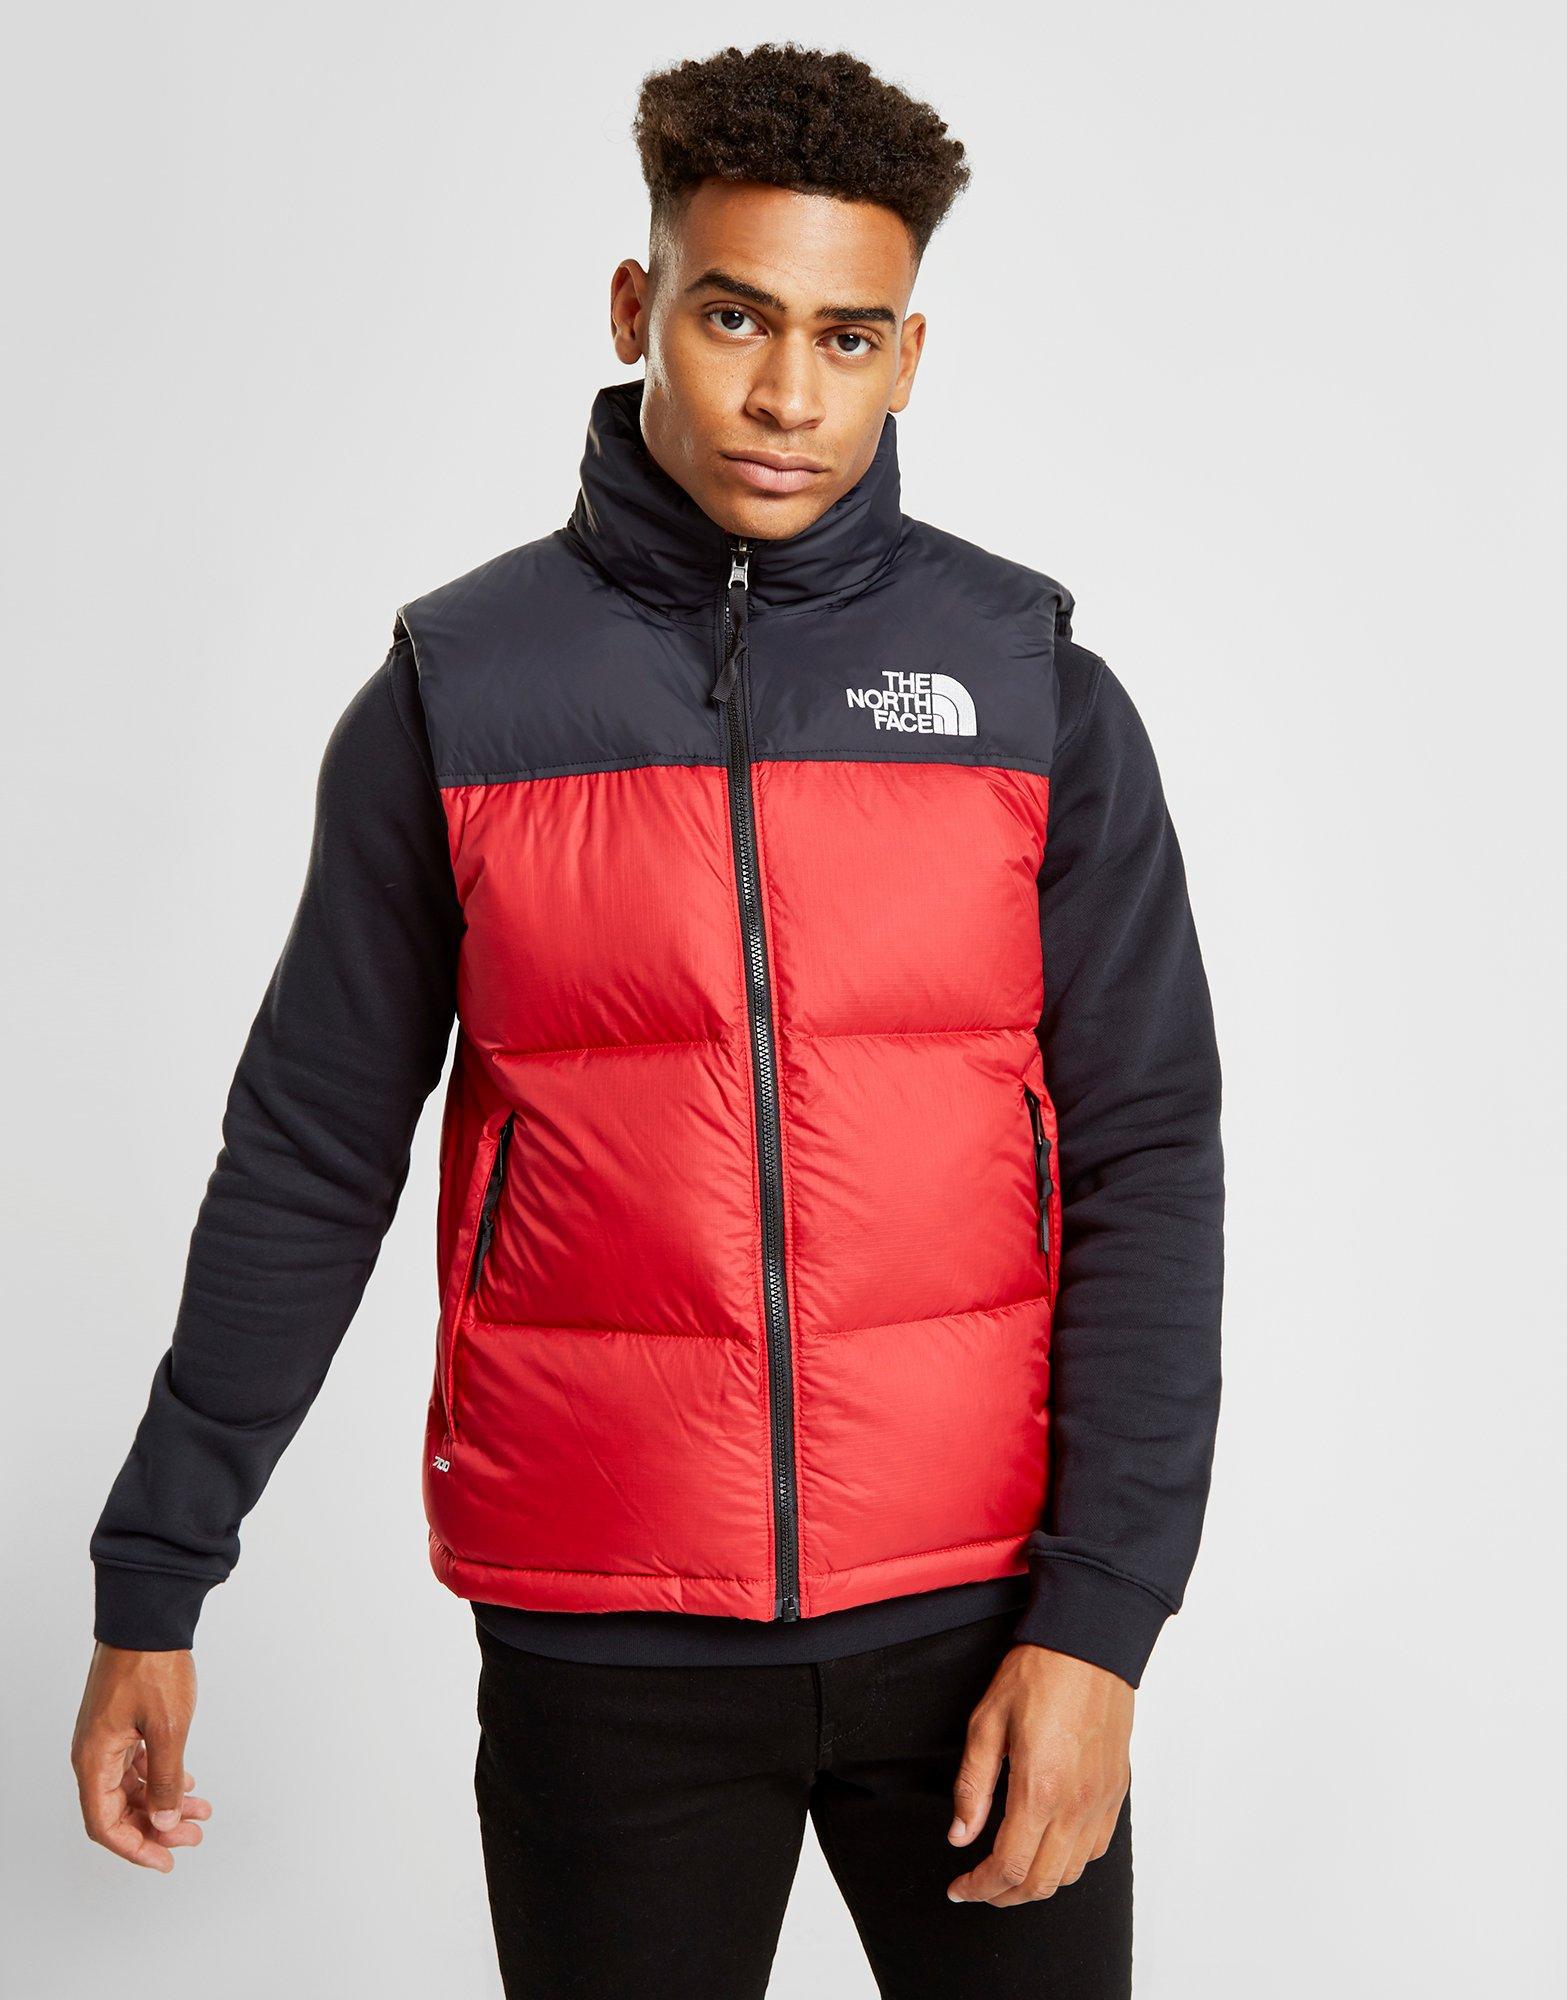 north face gilet red Cheaper Than 